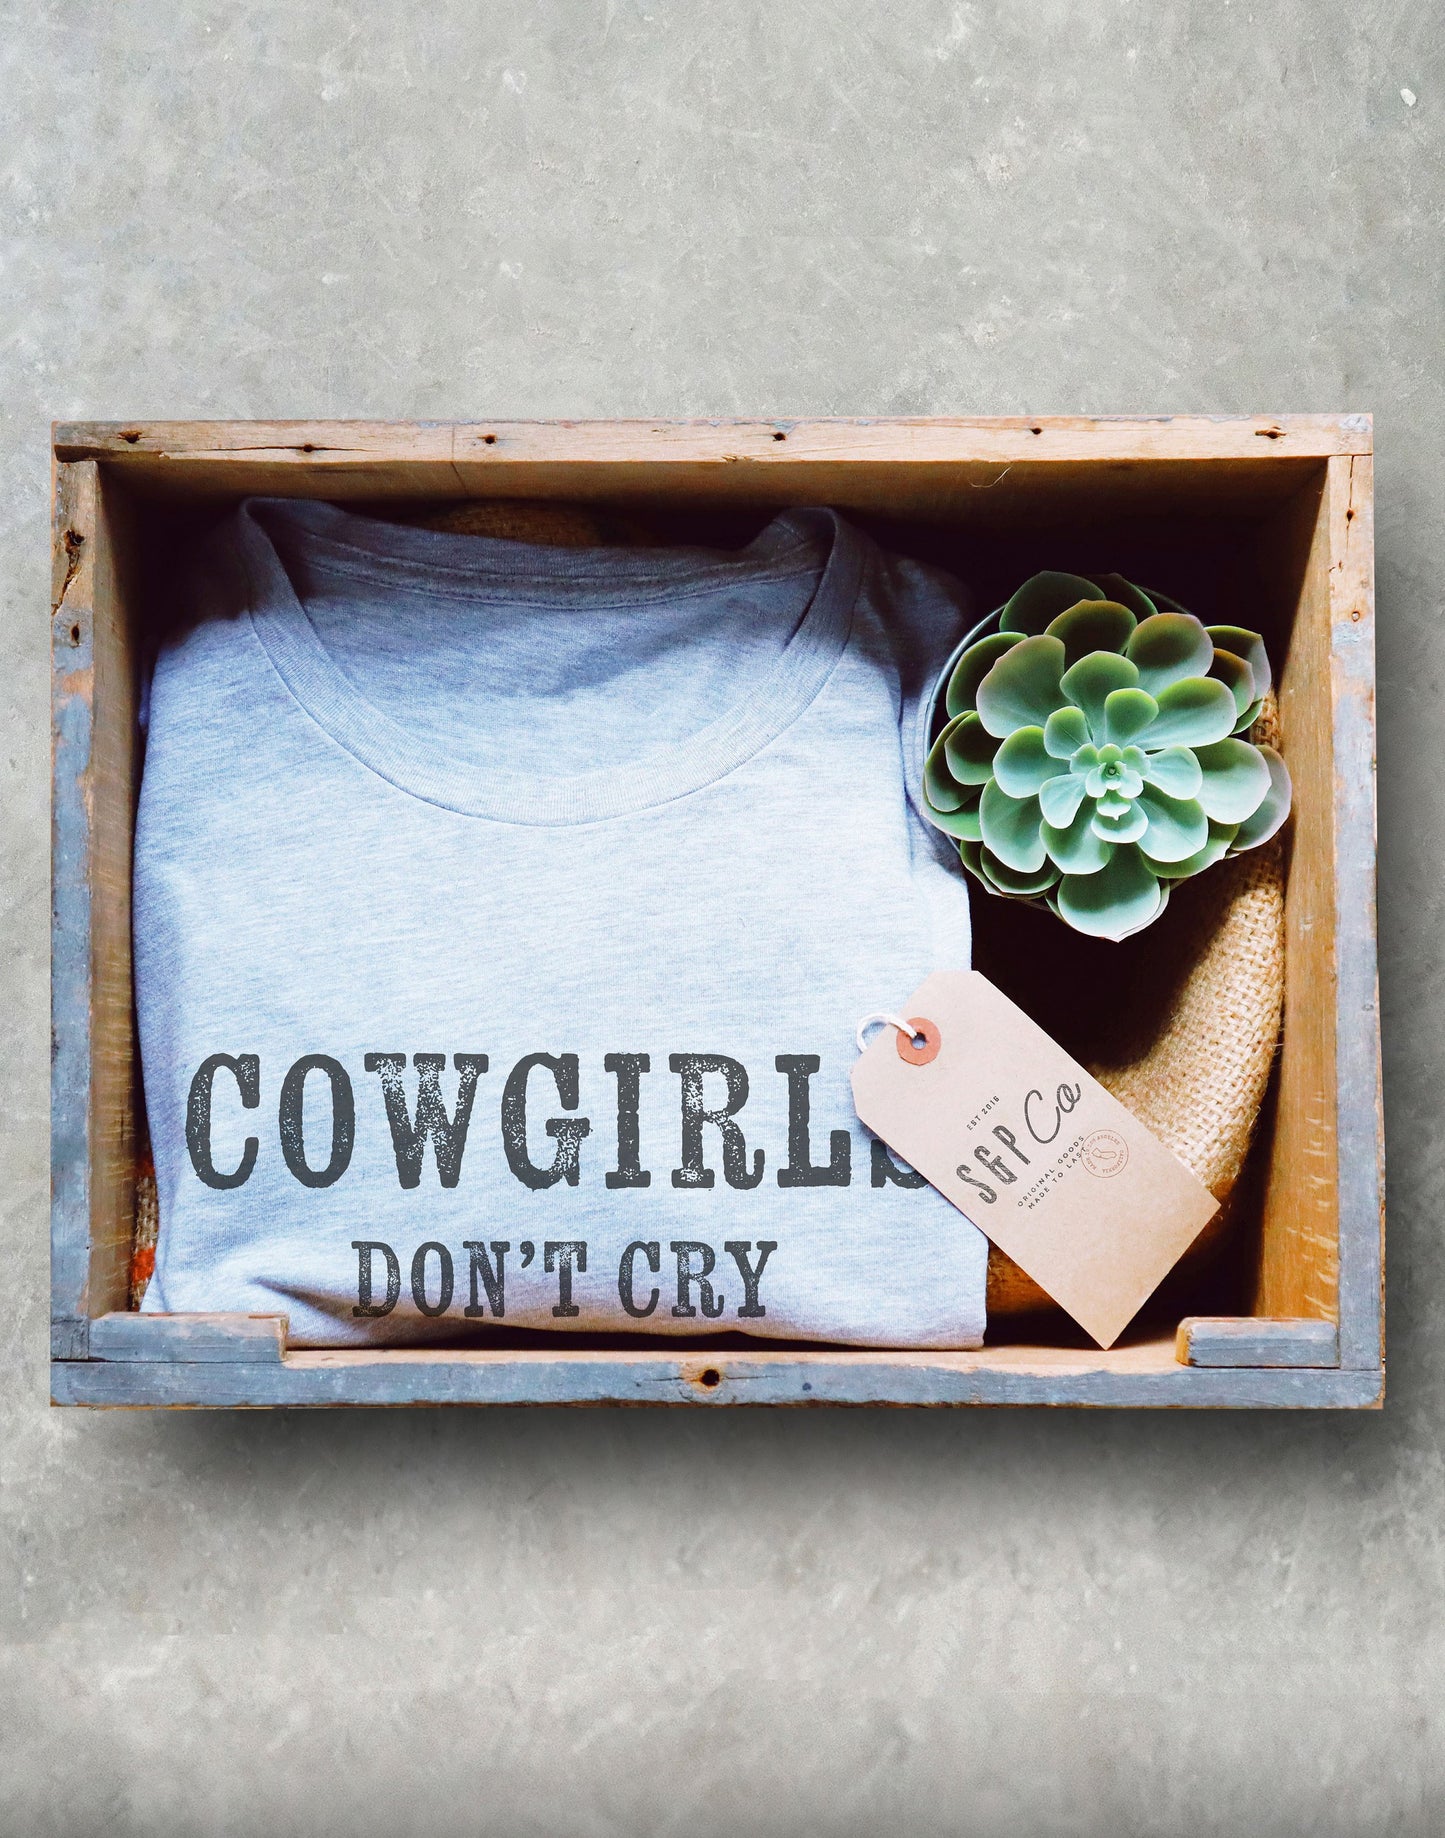 Cowgirls Don't Cry They Reload Unisex Shirt-Country Girl Shirt, Cowgirl Shirts, Cowgirl Outfit, Rodeo Shirt, Western Shirt, Cowgirl TeeShirt